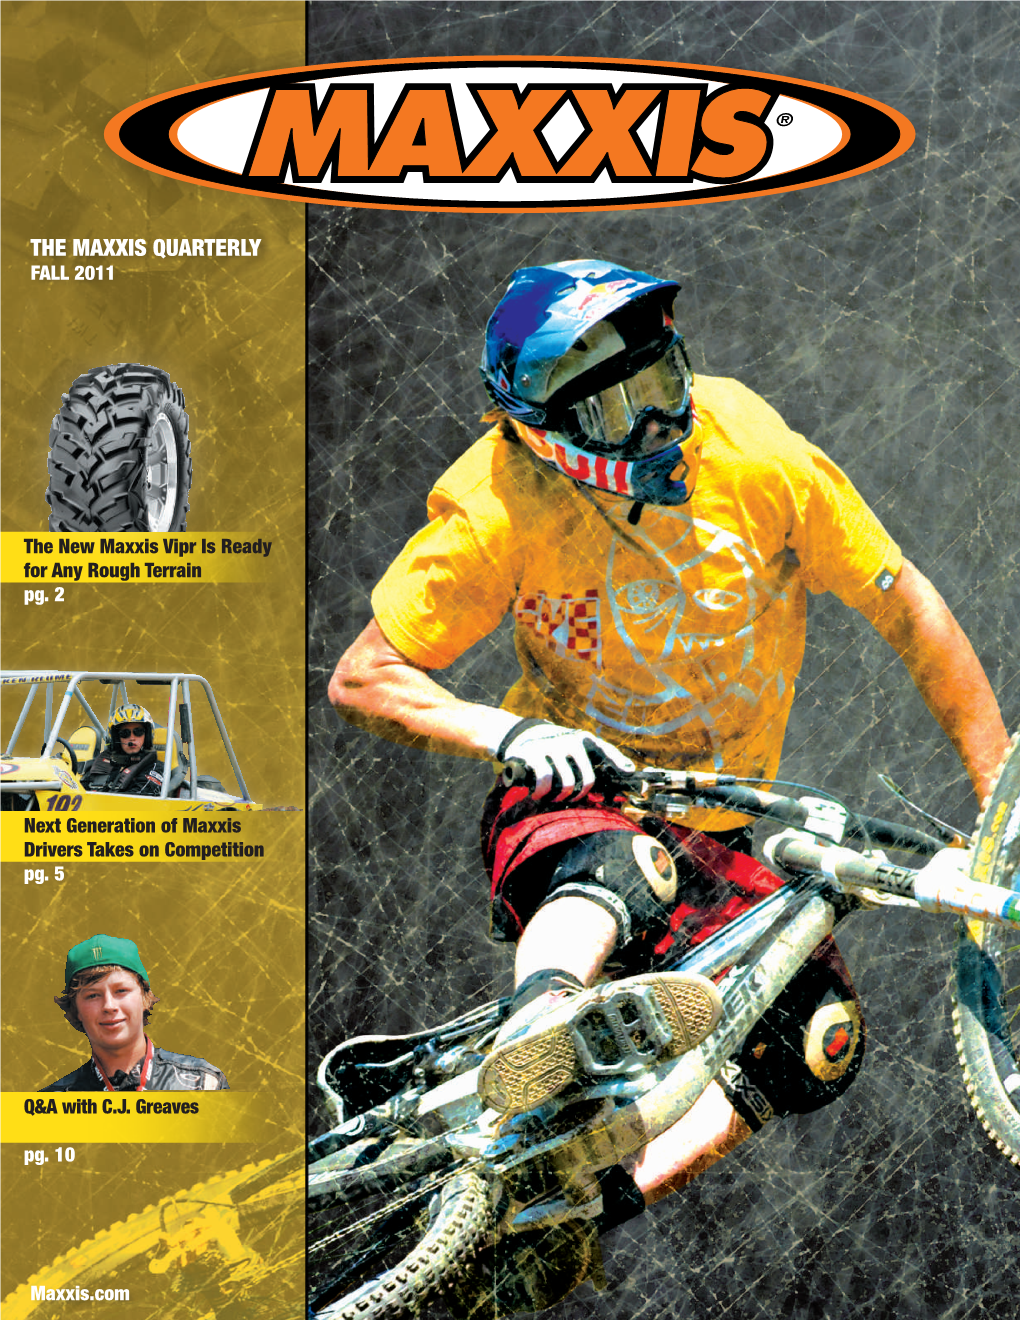 The Maxxis Quarterly Fall 2011